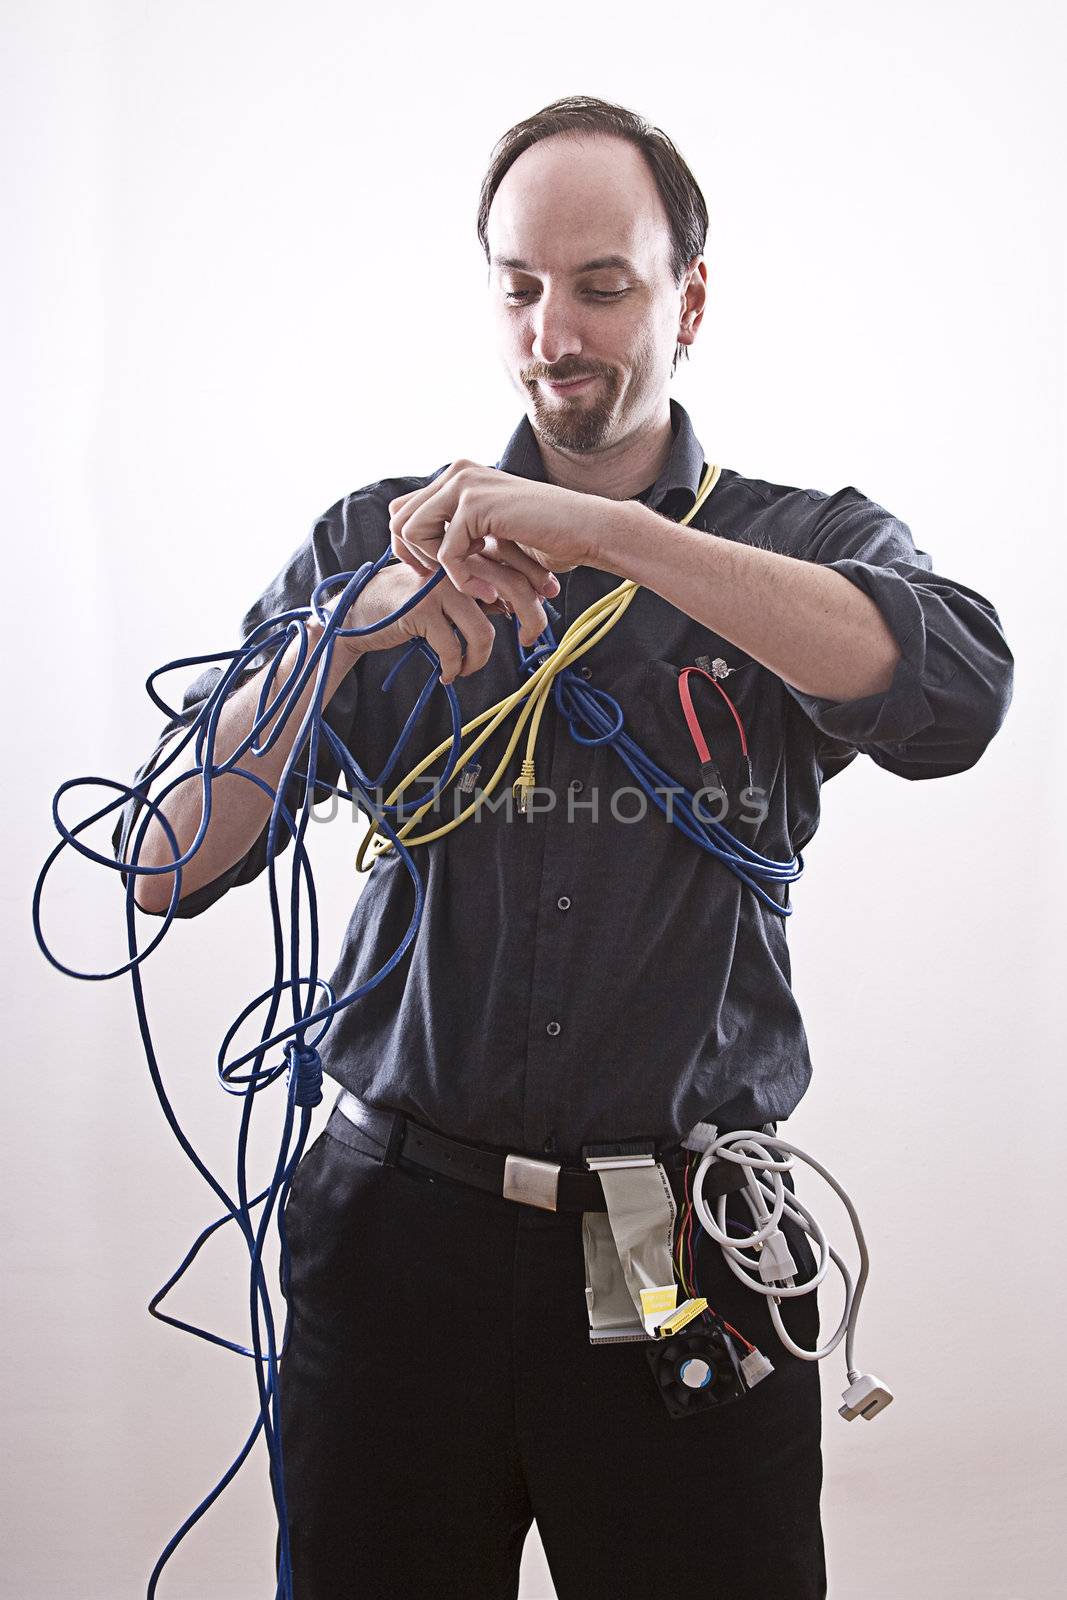 Computer technician entangle in network cable